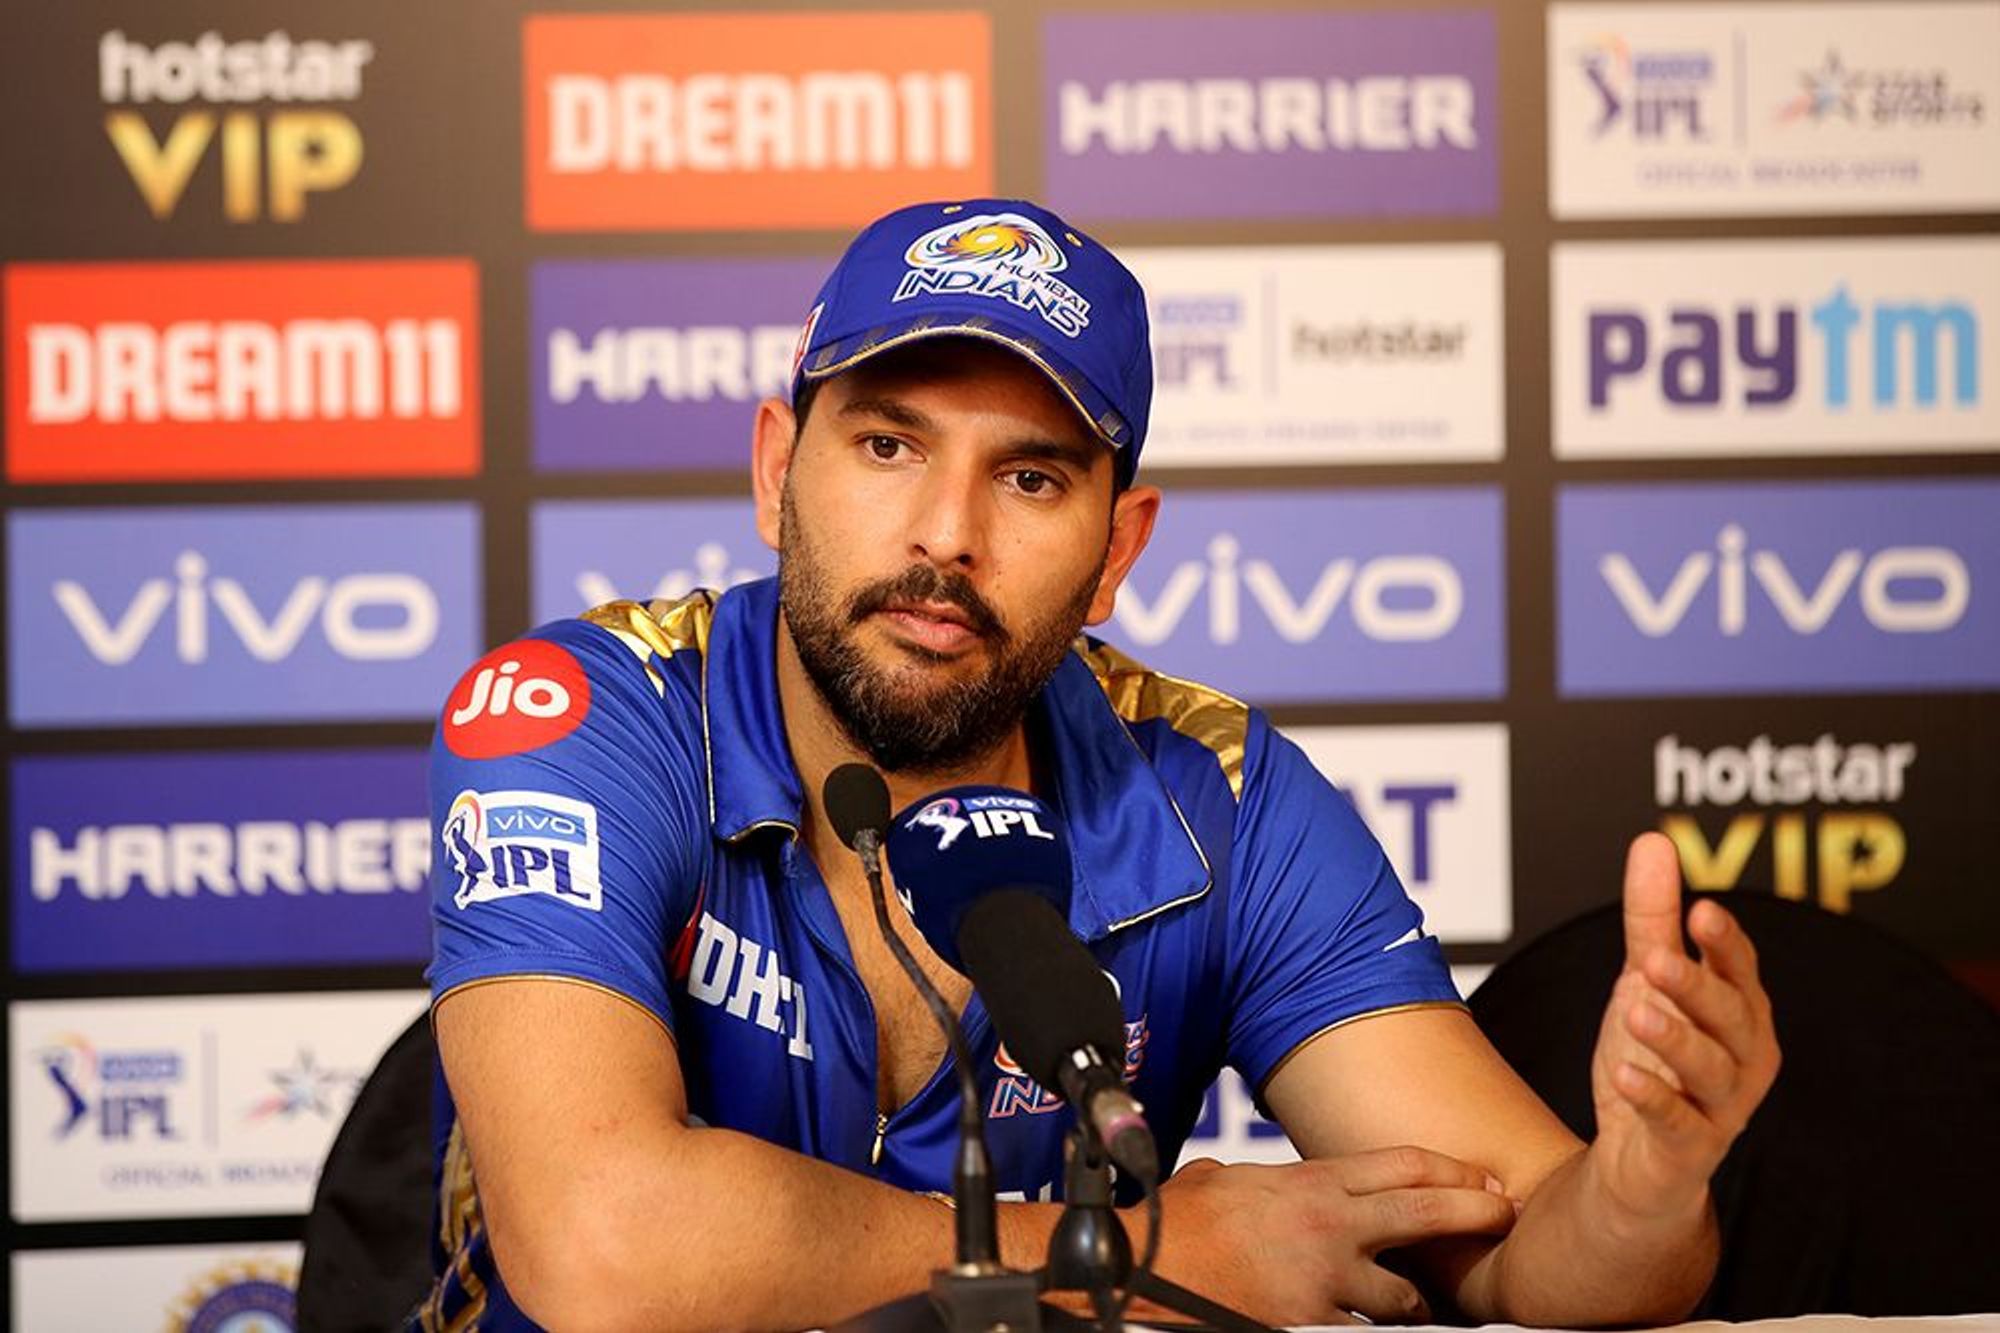 T20 cricket is a brand that you can play until you are 45, proclaims Yuvraj Singh